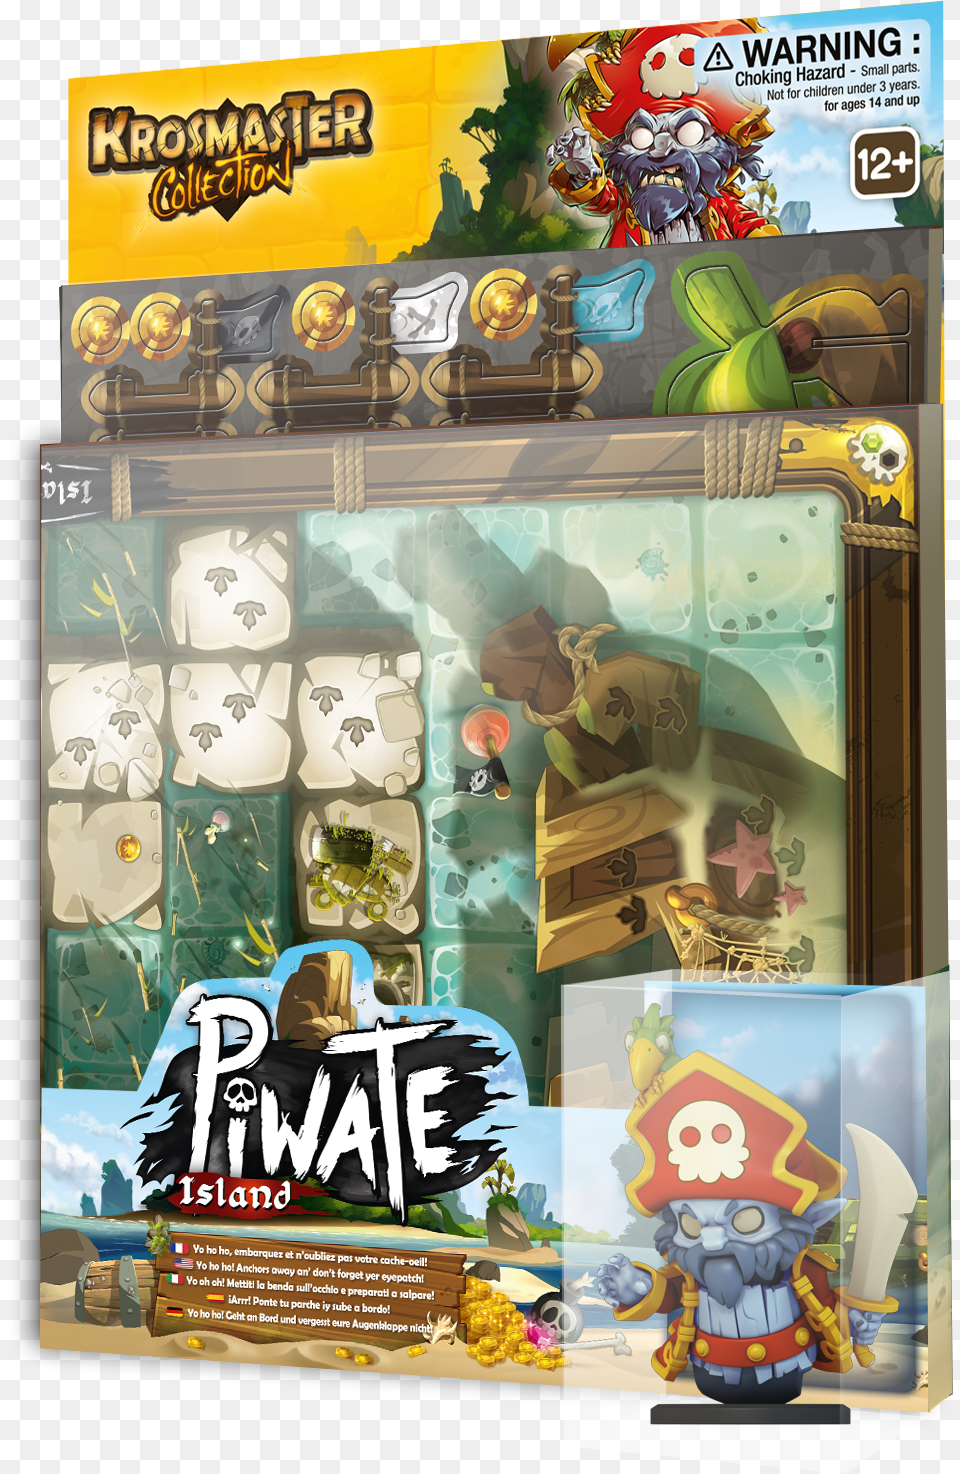 Piwate Island An Exciting New Board In The Krosmaster Krosmaster Arena Piwate Island, Book, Comics, Publication, Baby Free Transparent Png